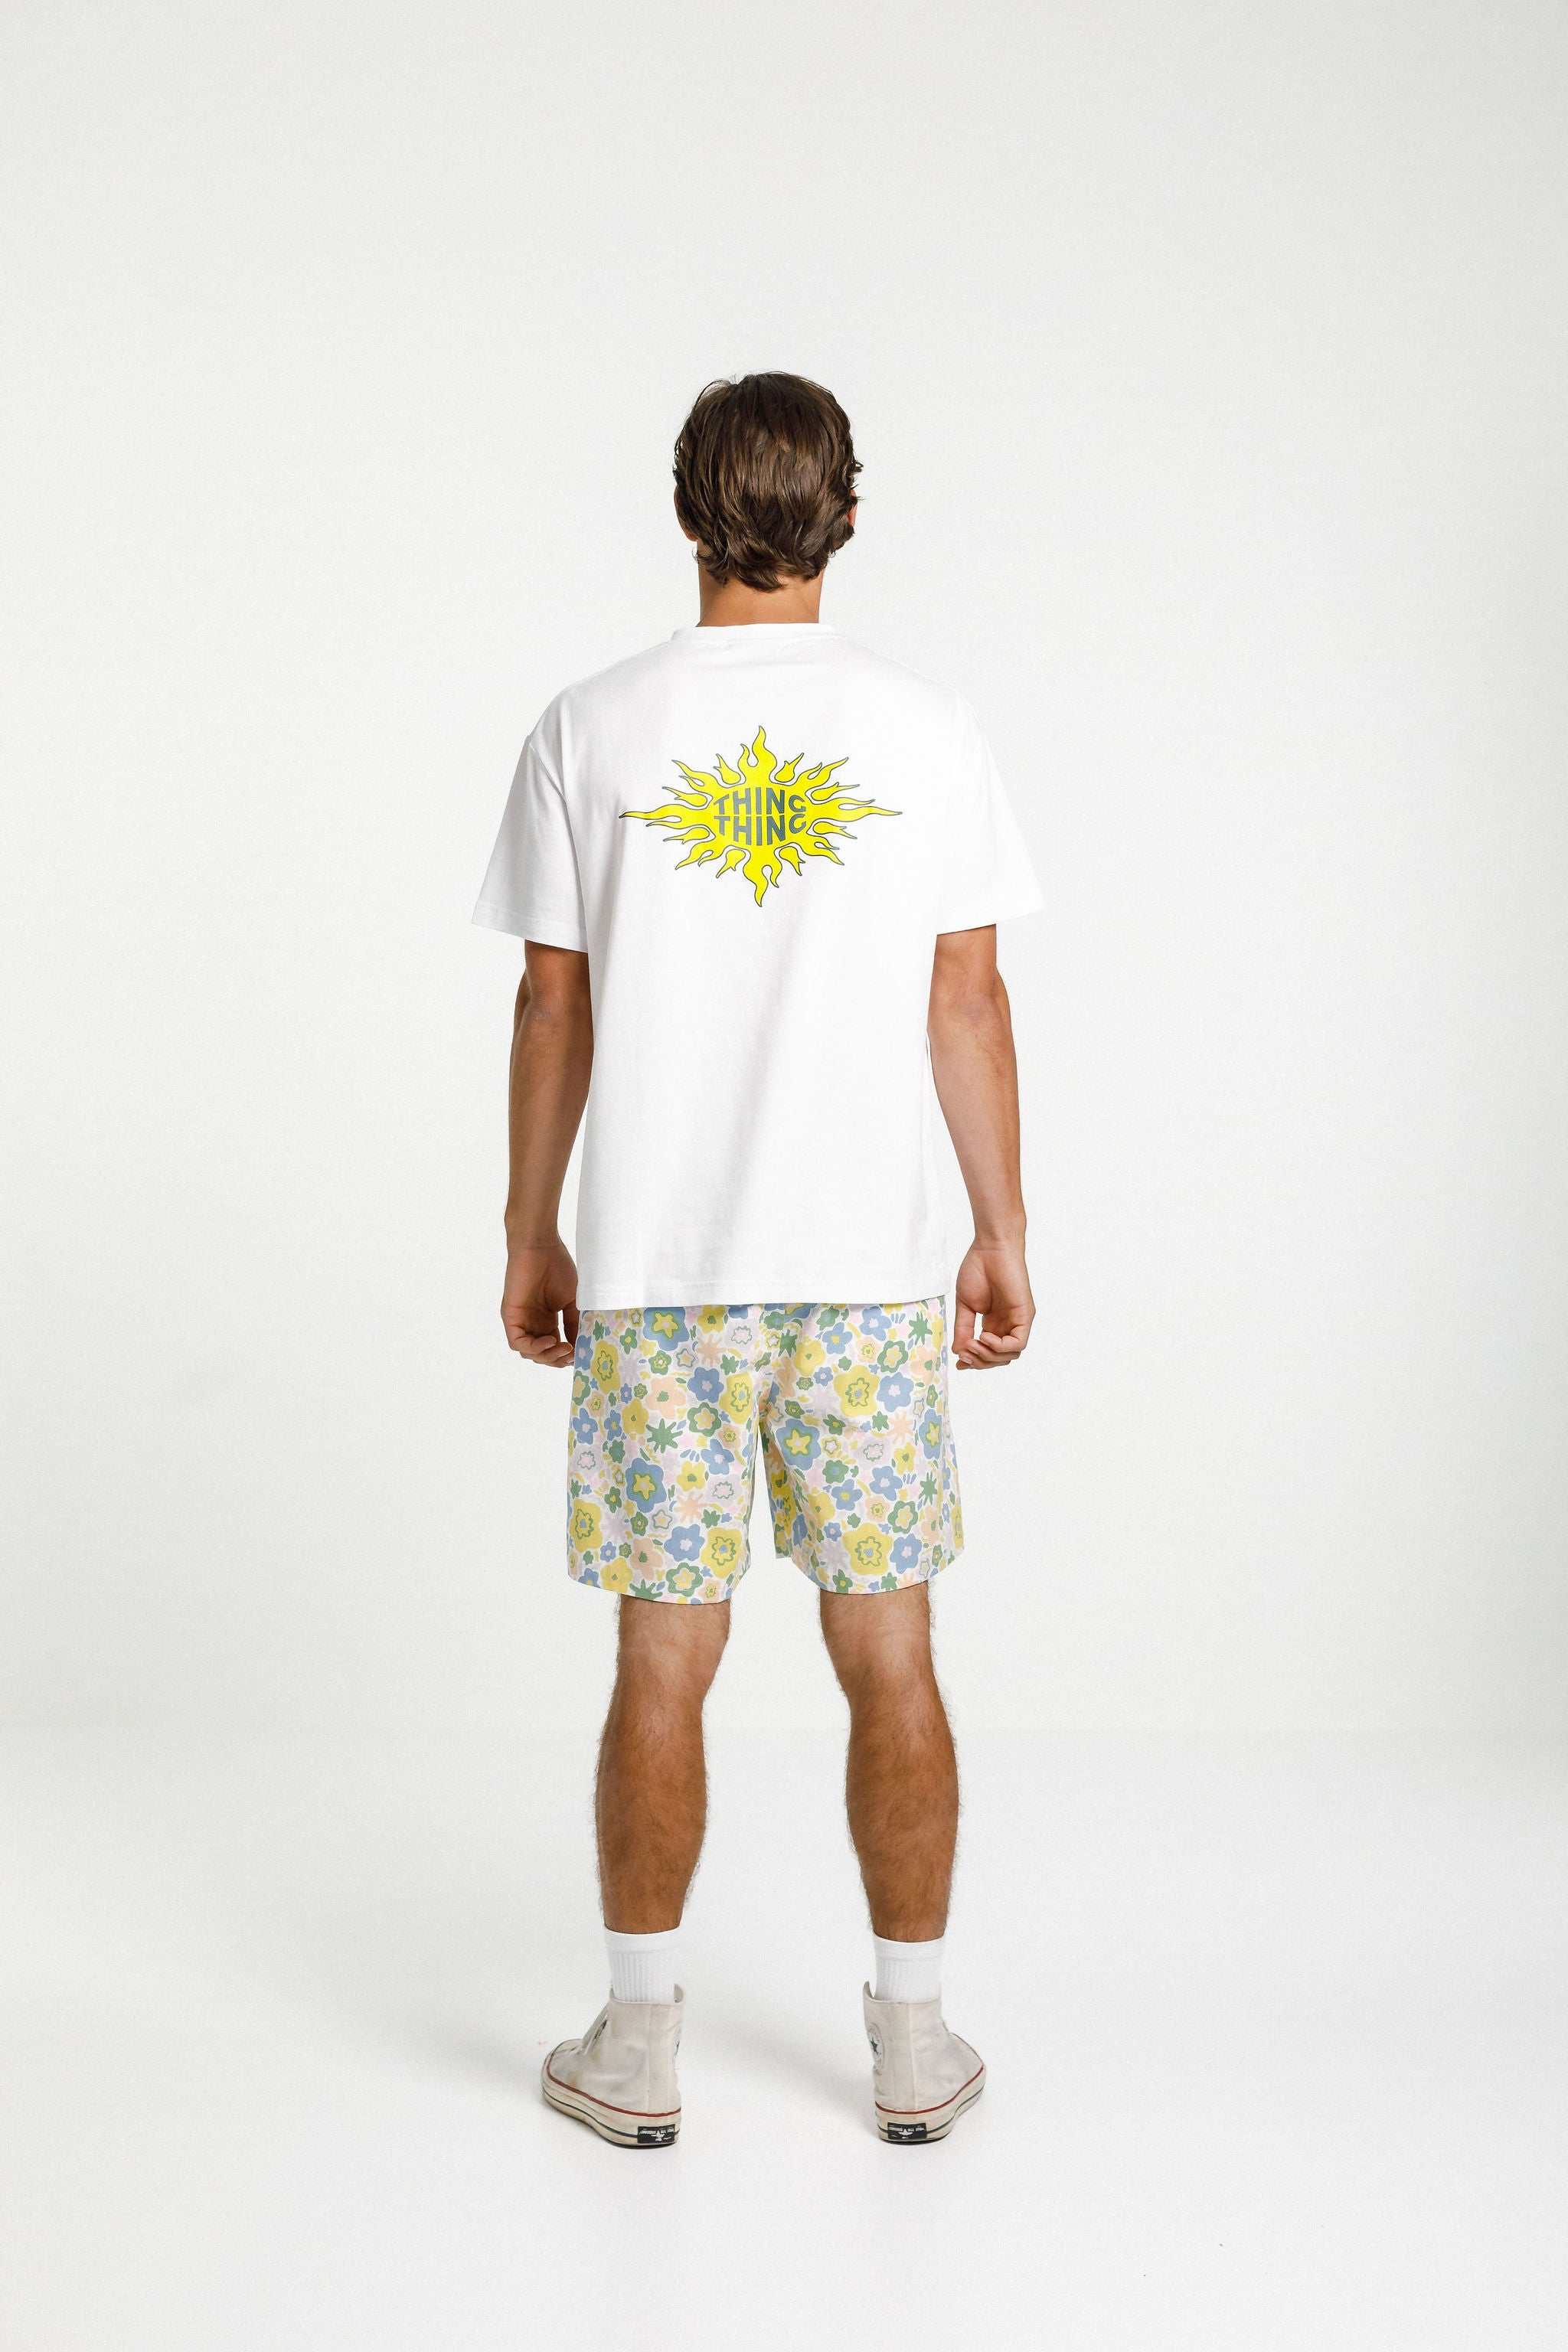 Ample Tee - Sale - White with Flame Sun Print